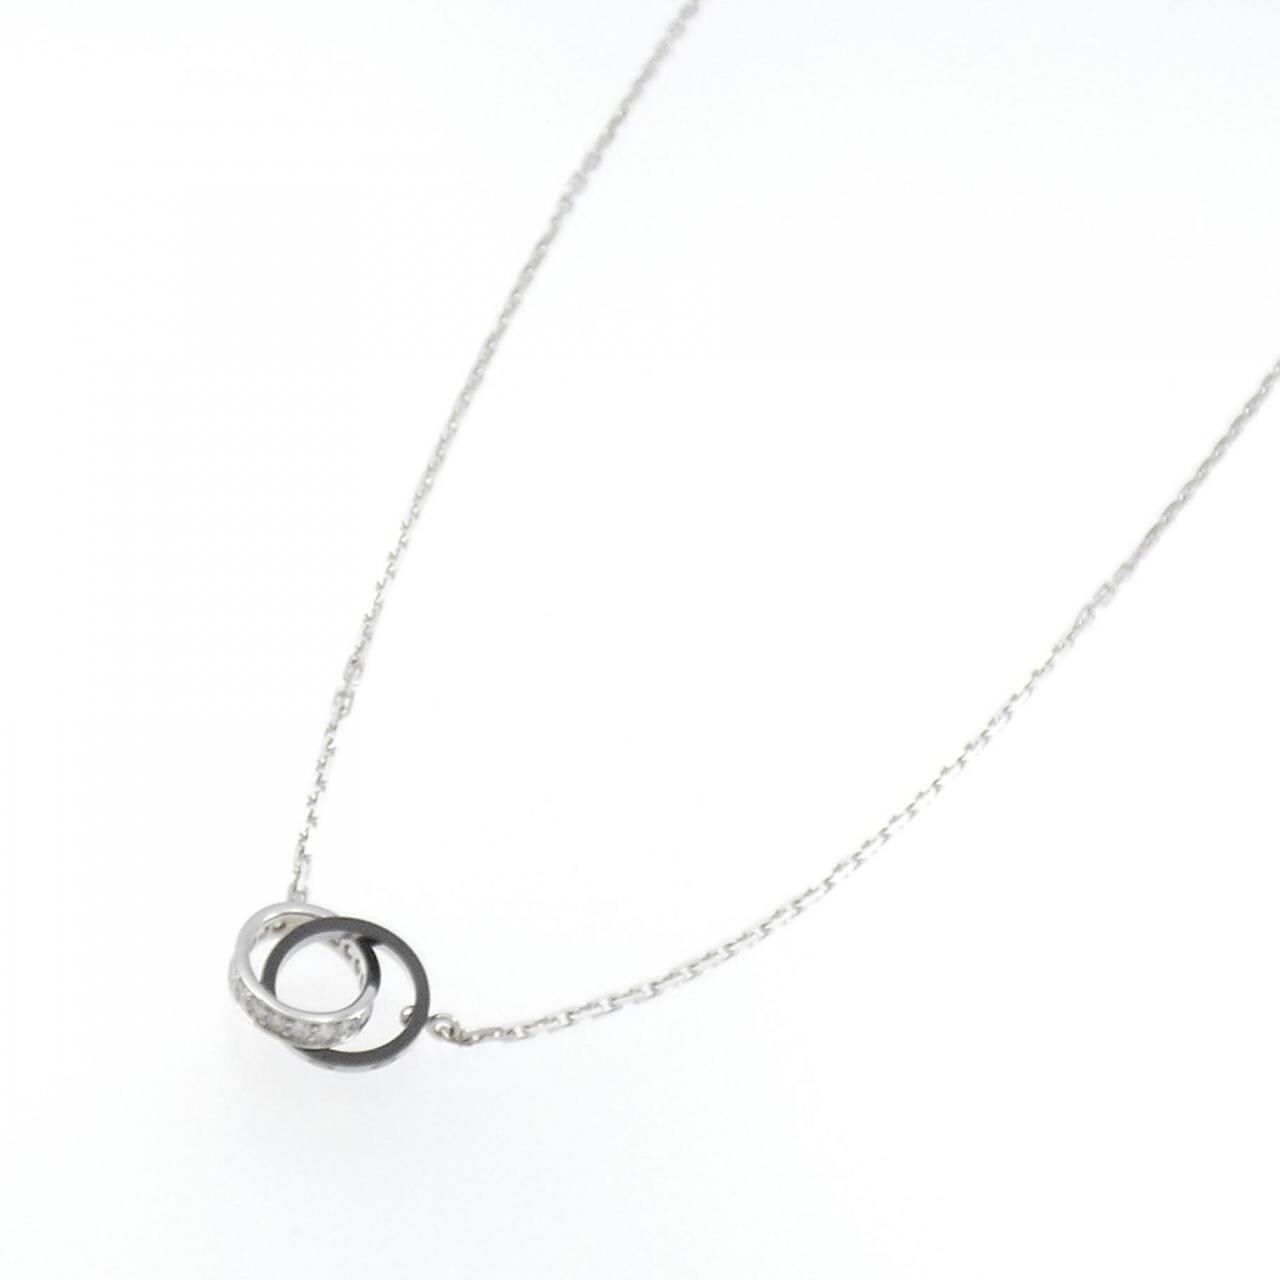 Cartier Baby Love 2008 X'mas Collection Necklace